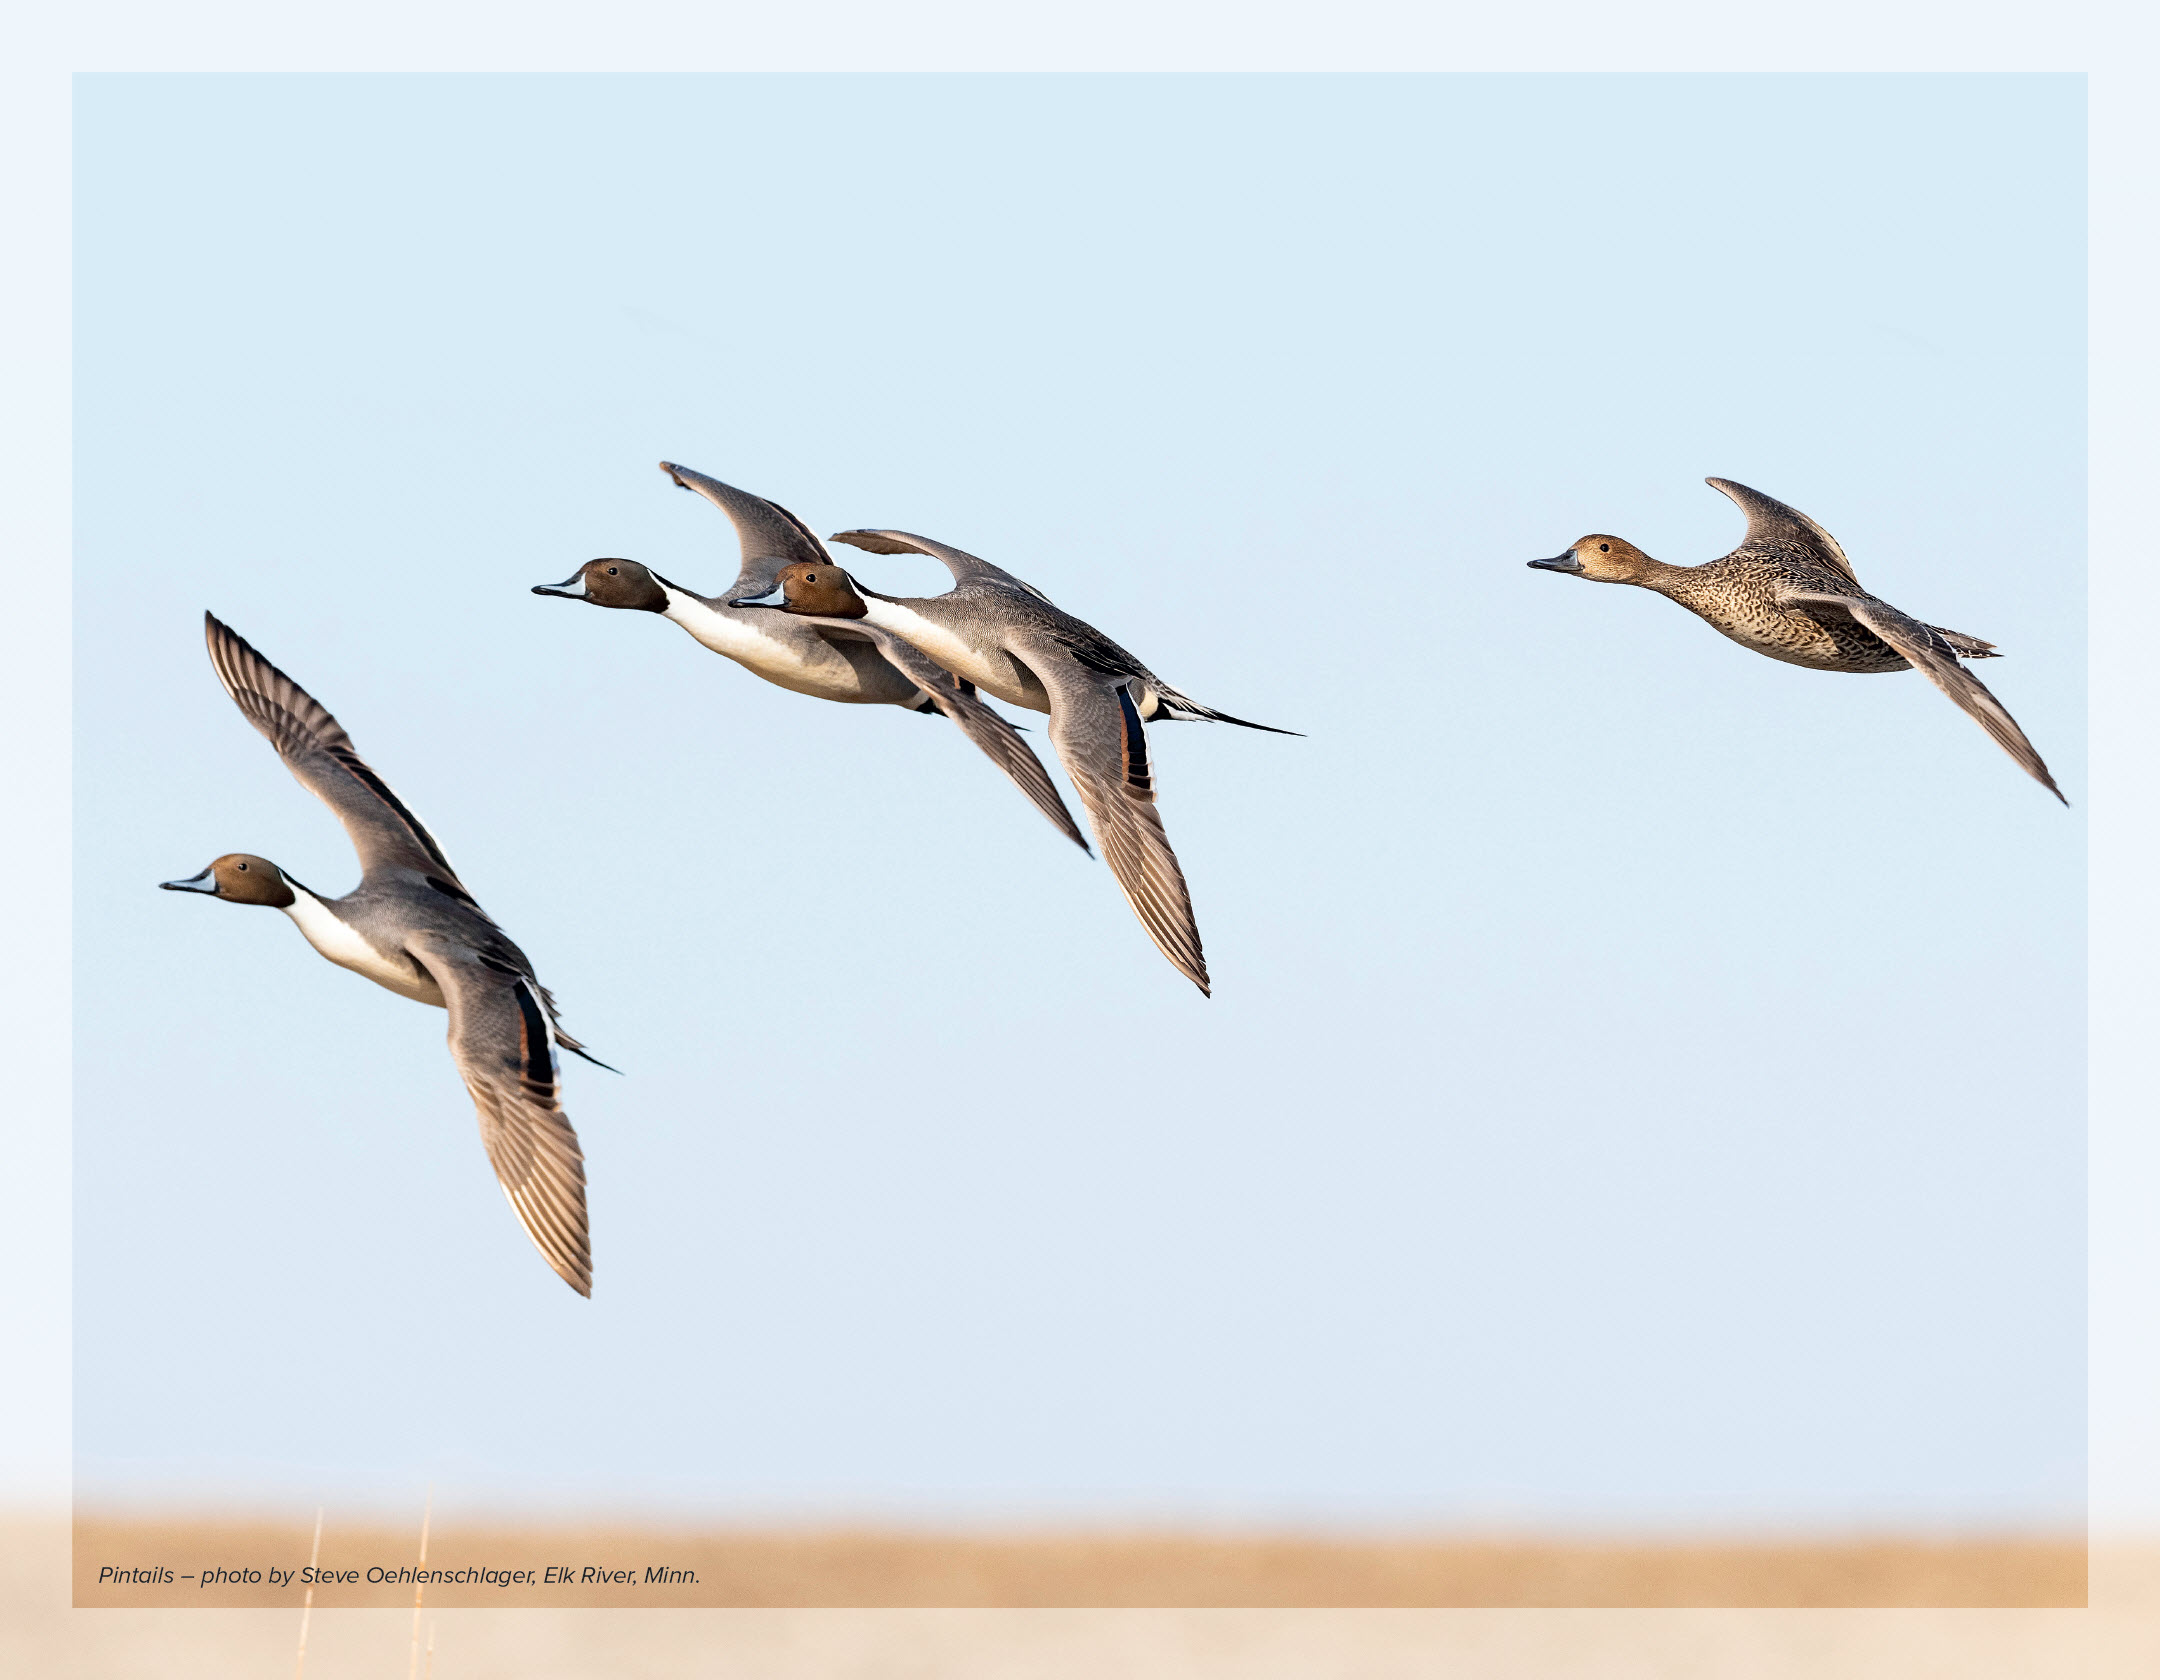 Pintails taken by Steve Oehlenschlager